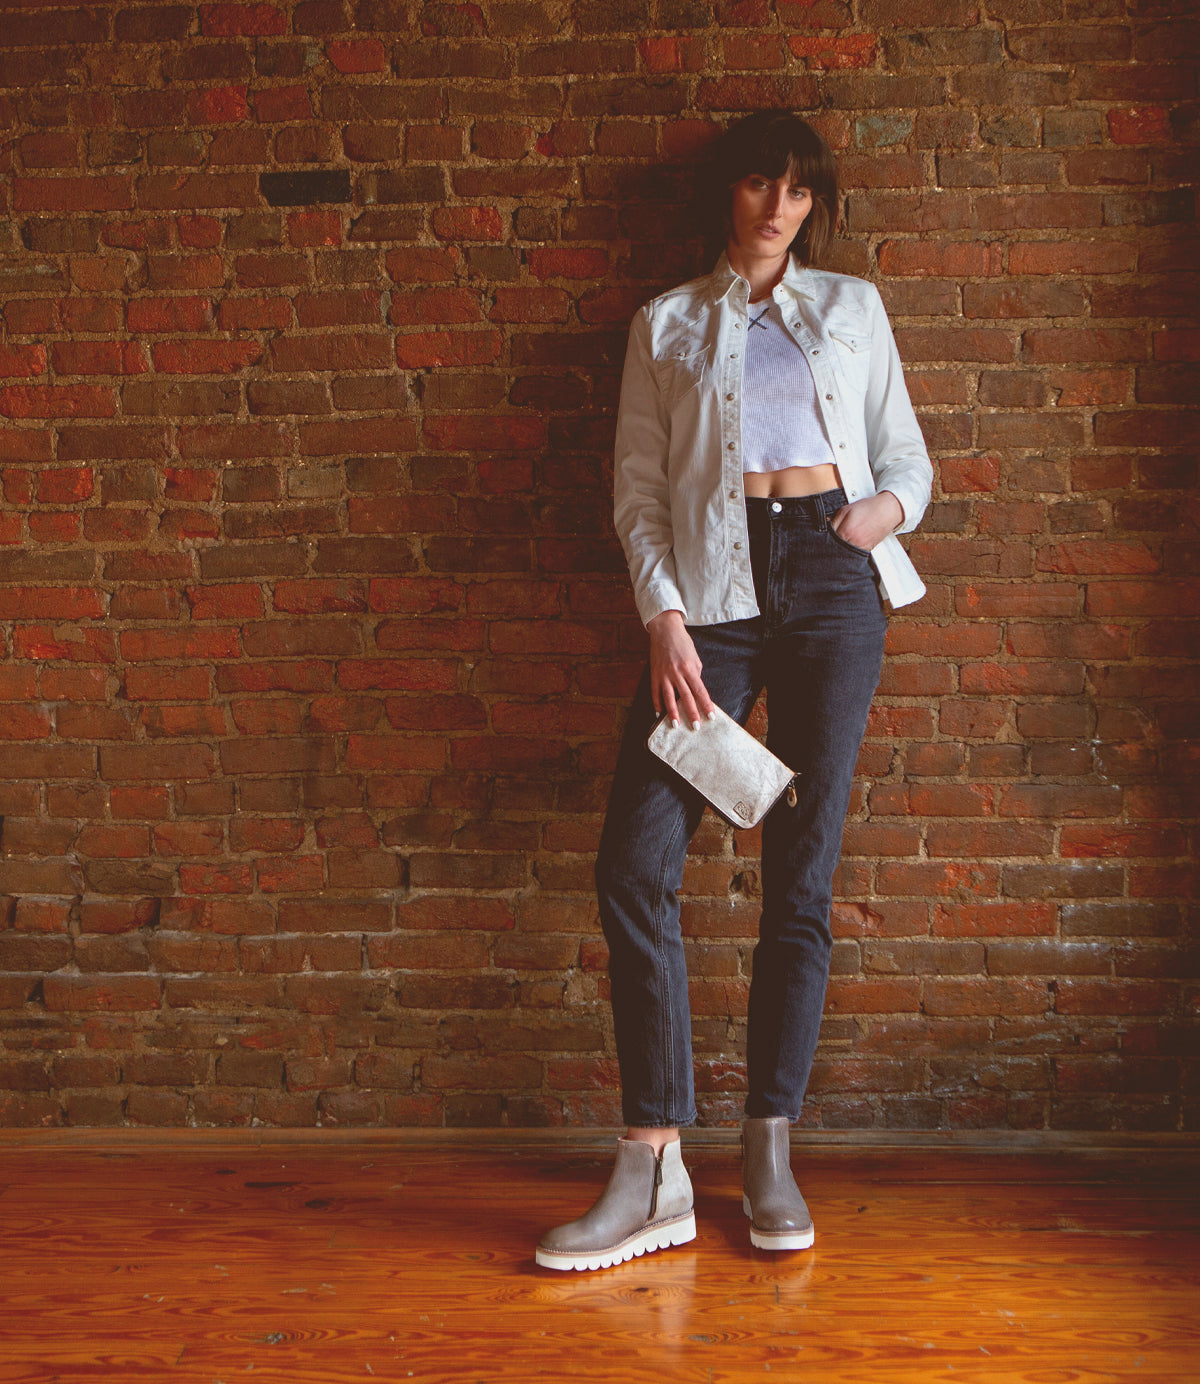 A woman carrying a Bed Stu Templeton II leather clutch, standing in front of a brick wall.